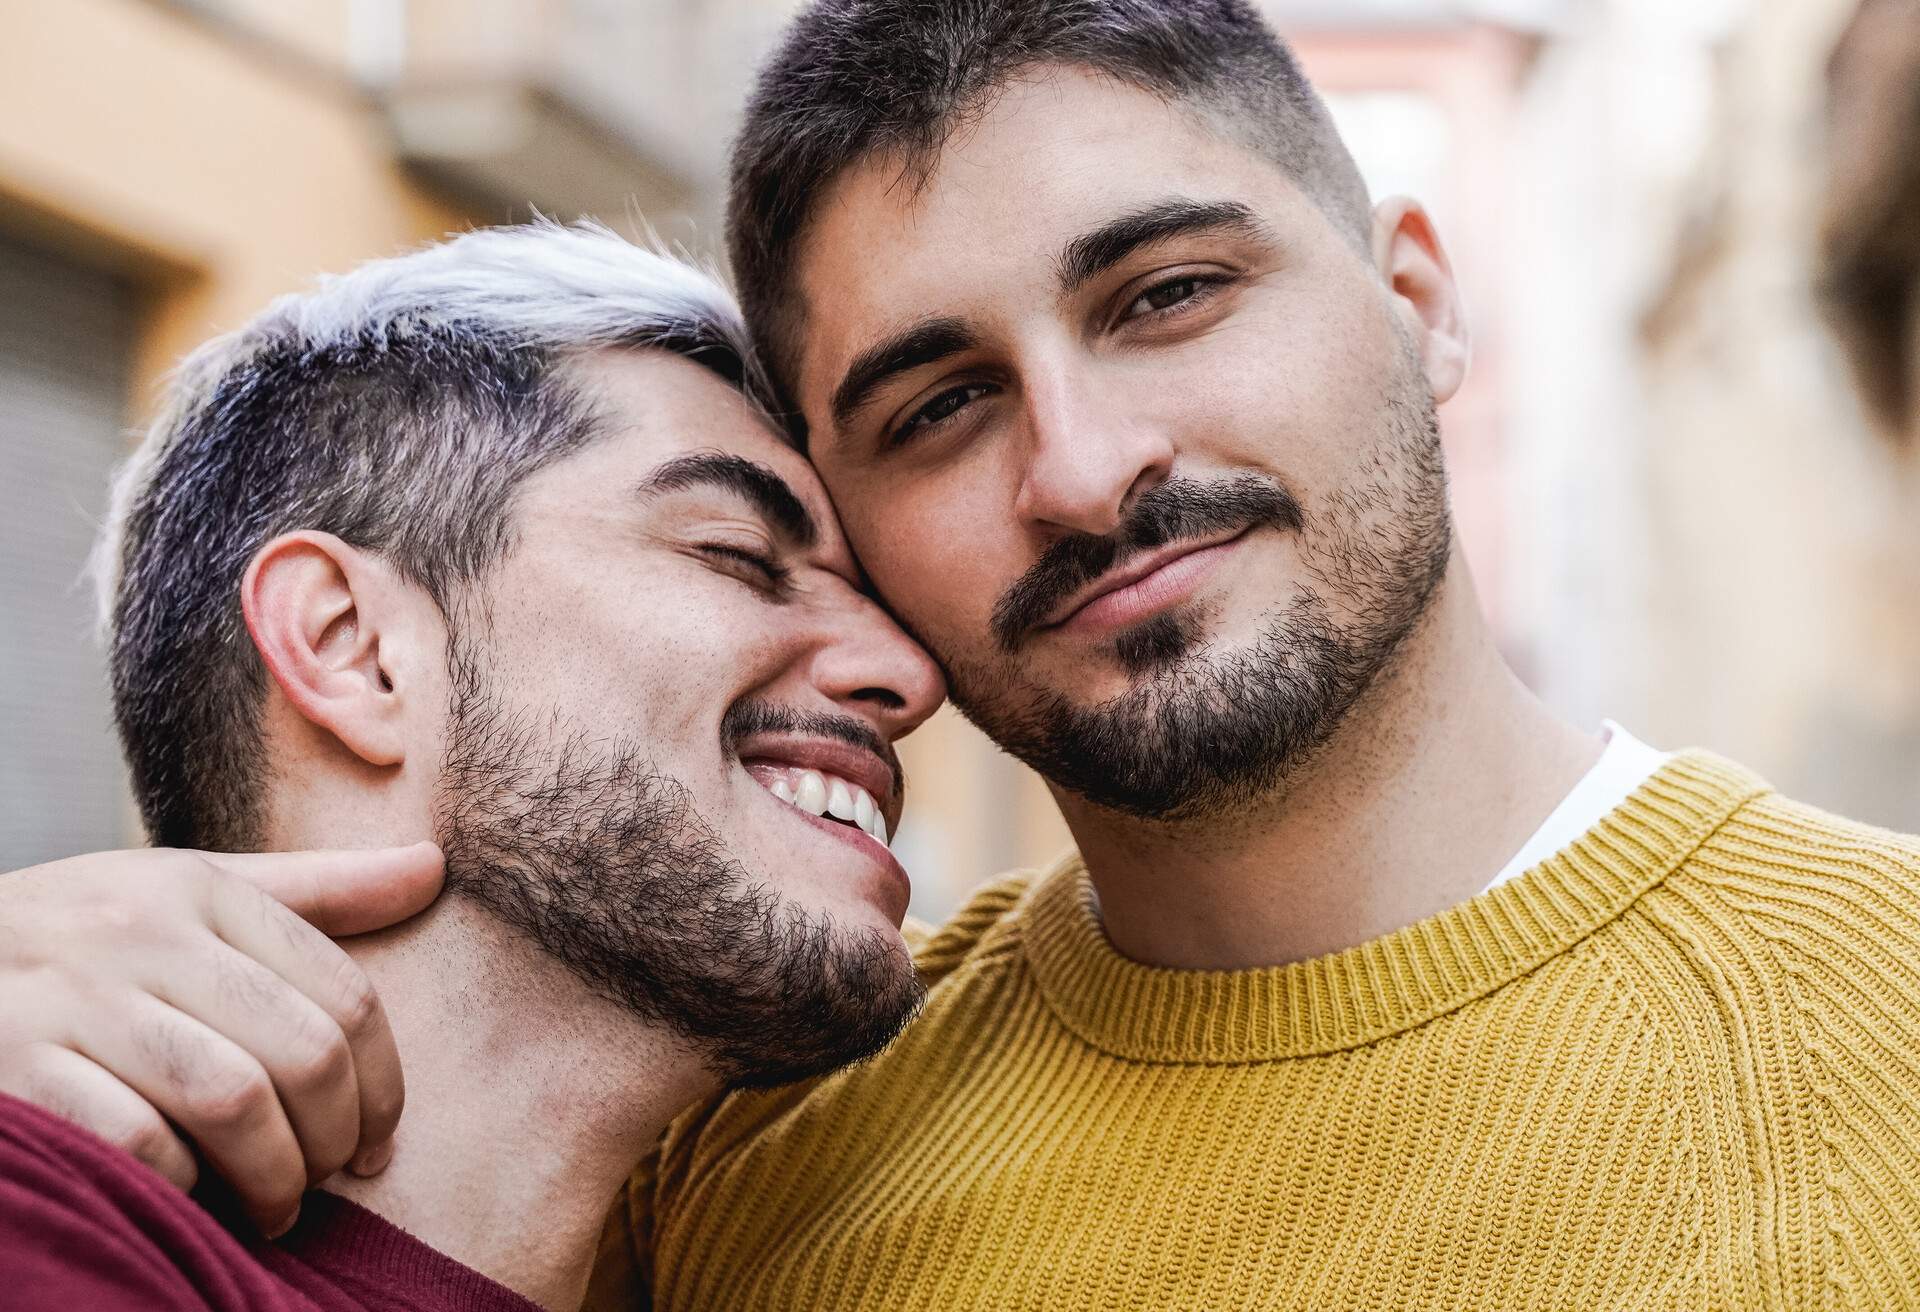 Gay male couple having tender moment outdoor in the city - LGBT love concept